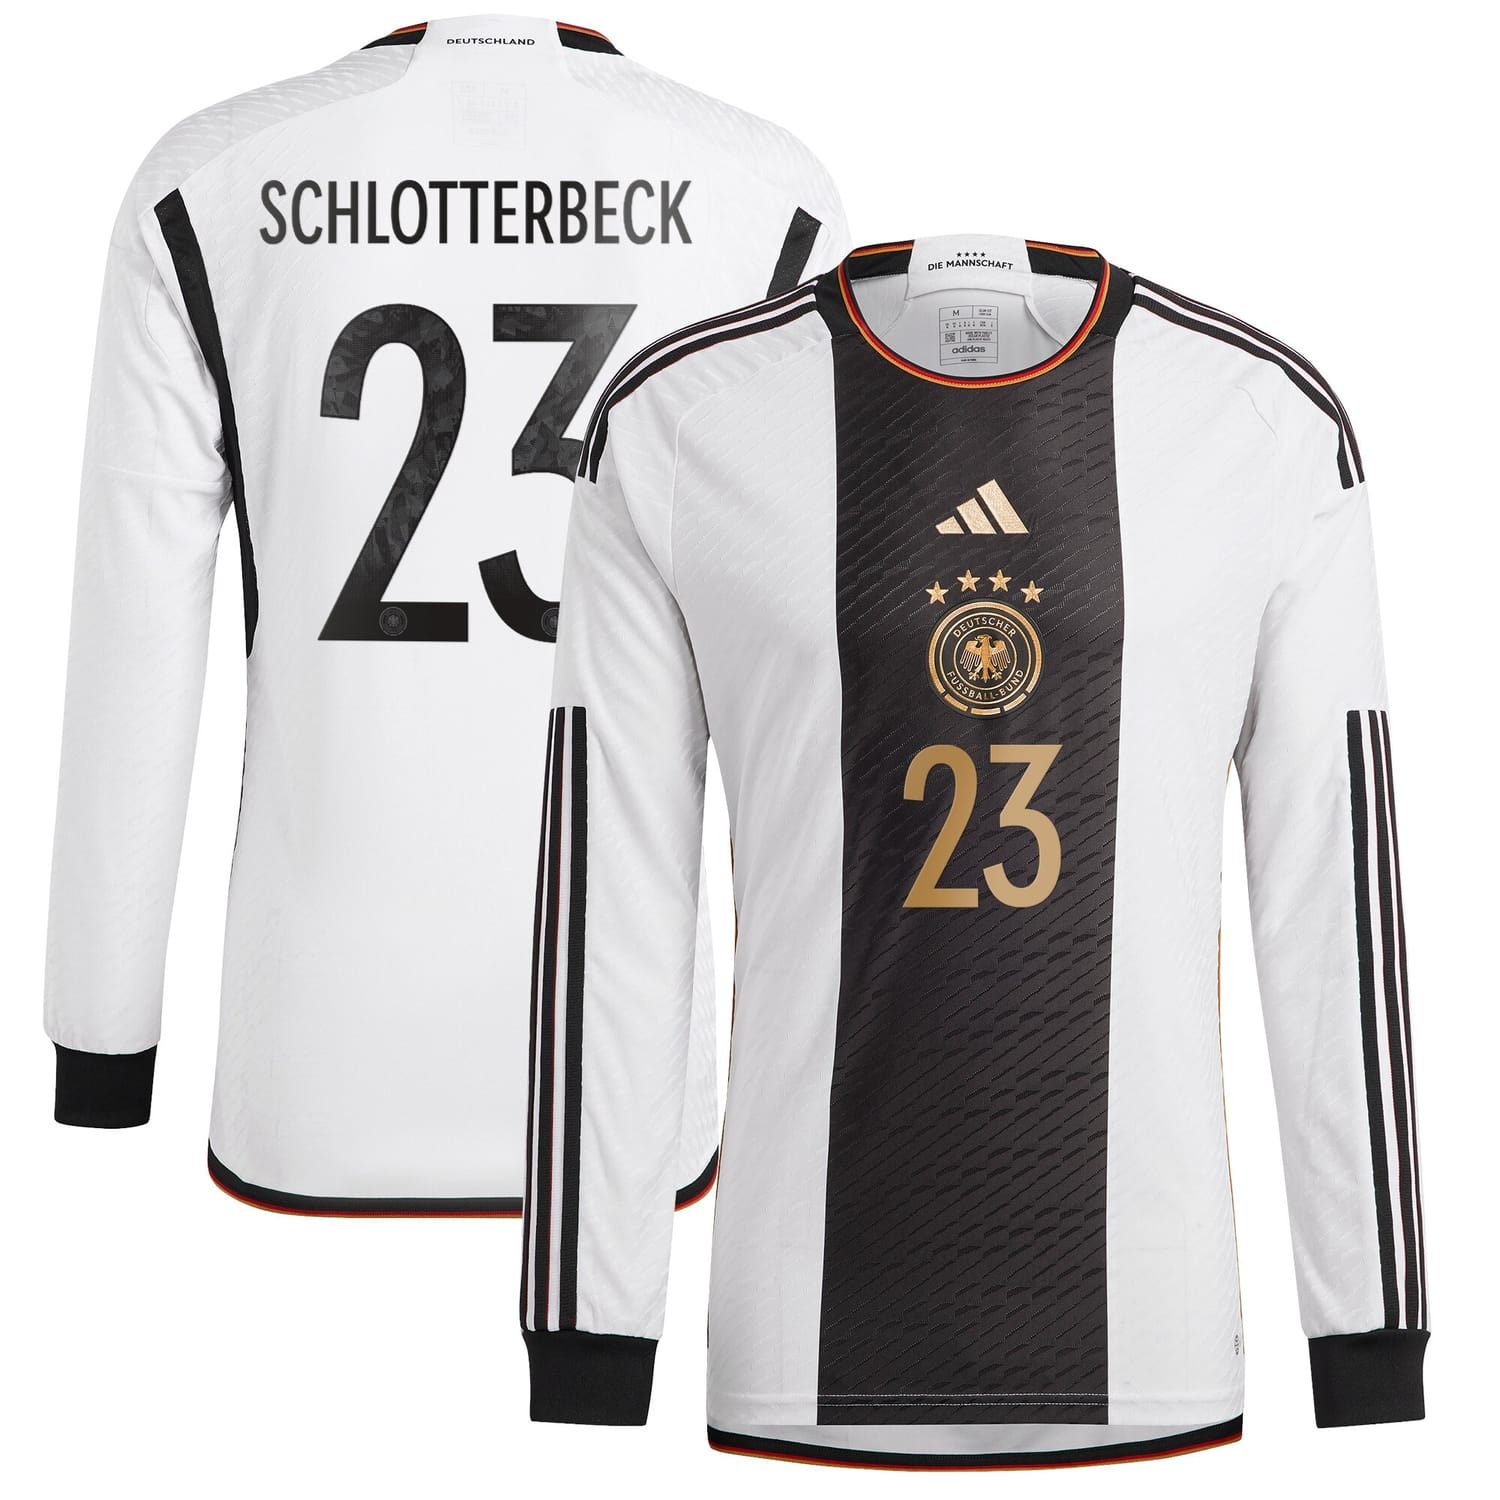 Germany National Team Home Authentic Jersey Shirt Long Sleeve player Nico Schlotterbeck 23 printing for Men